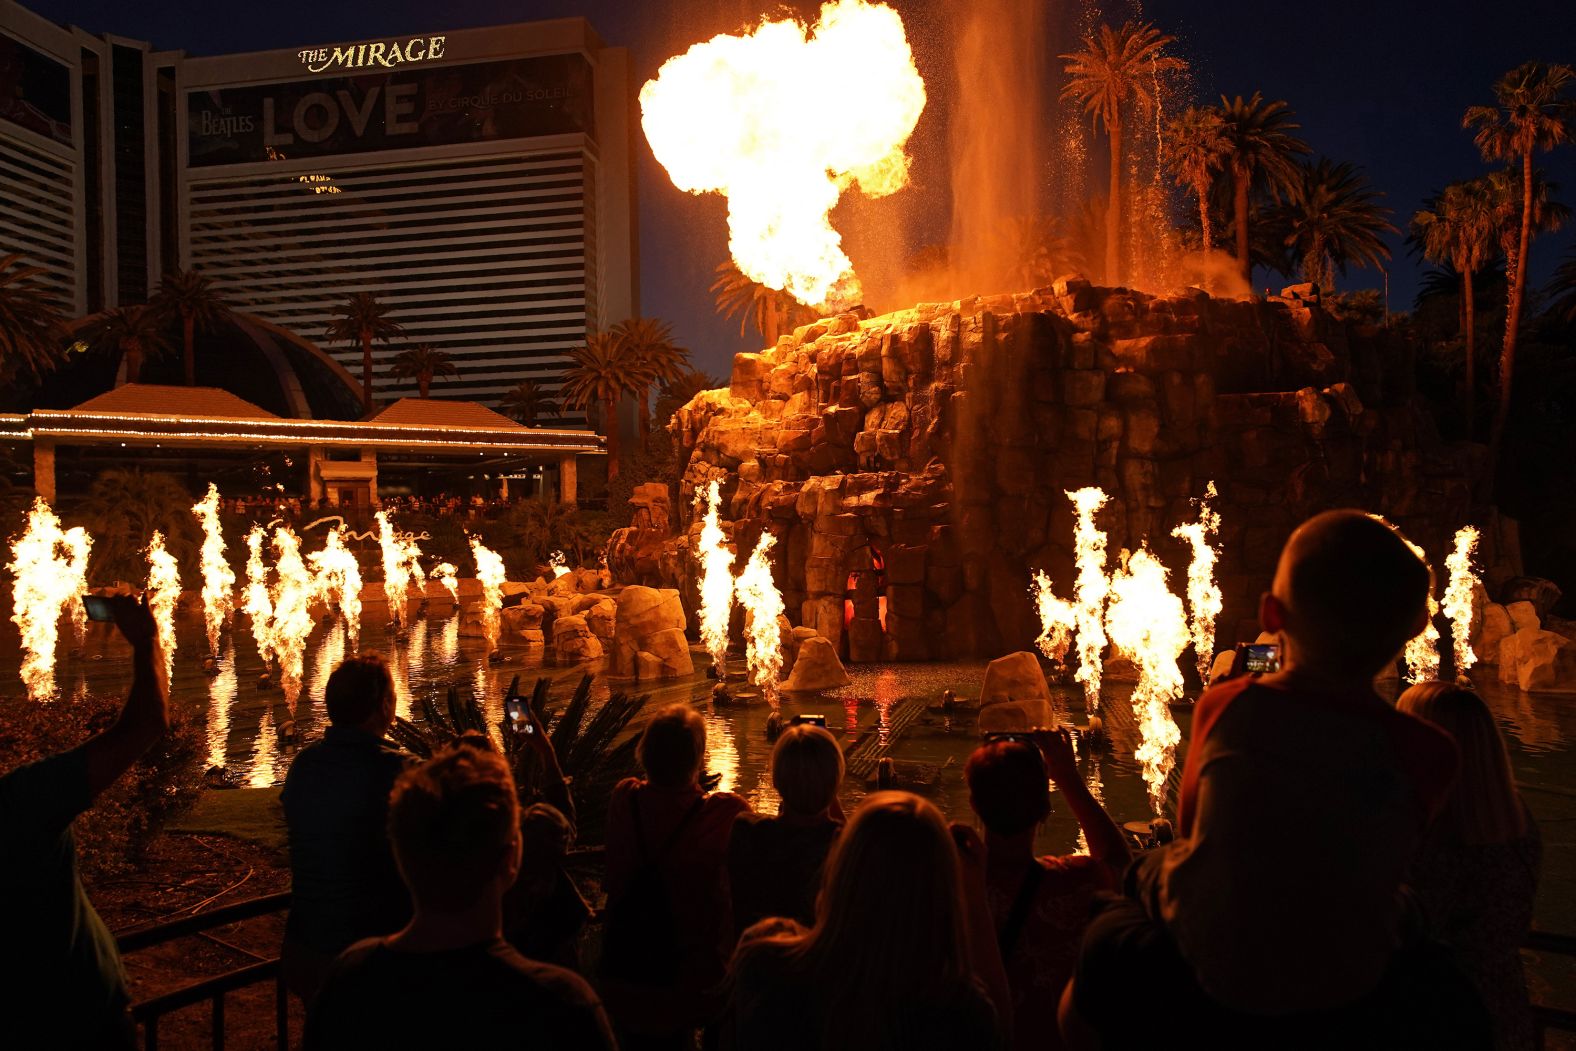 People watch the volcano show at The Mirage hotel in 2022.